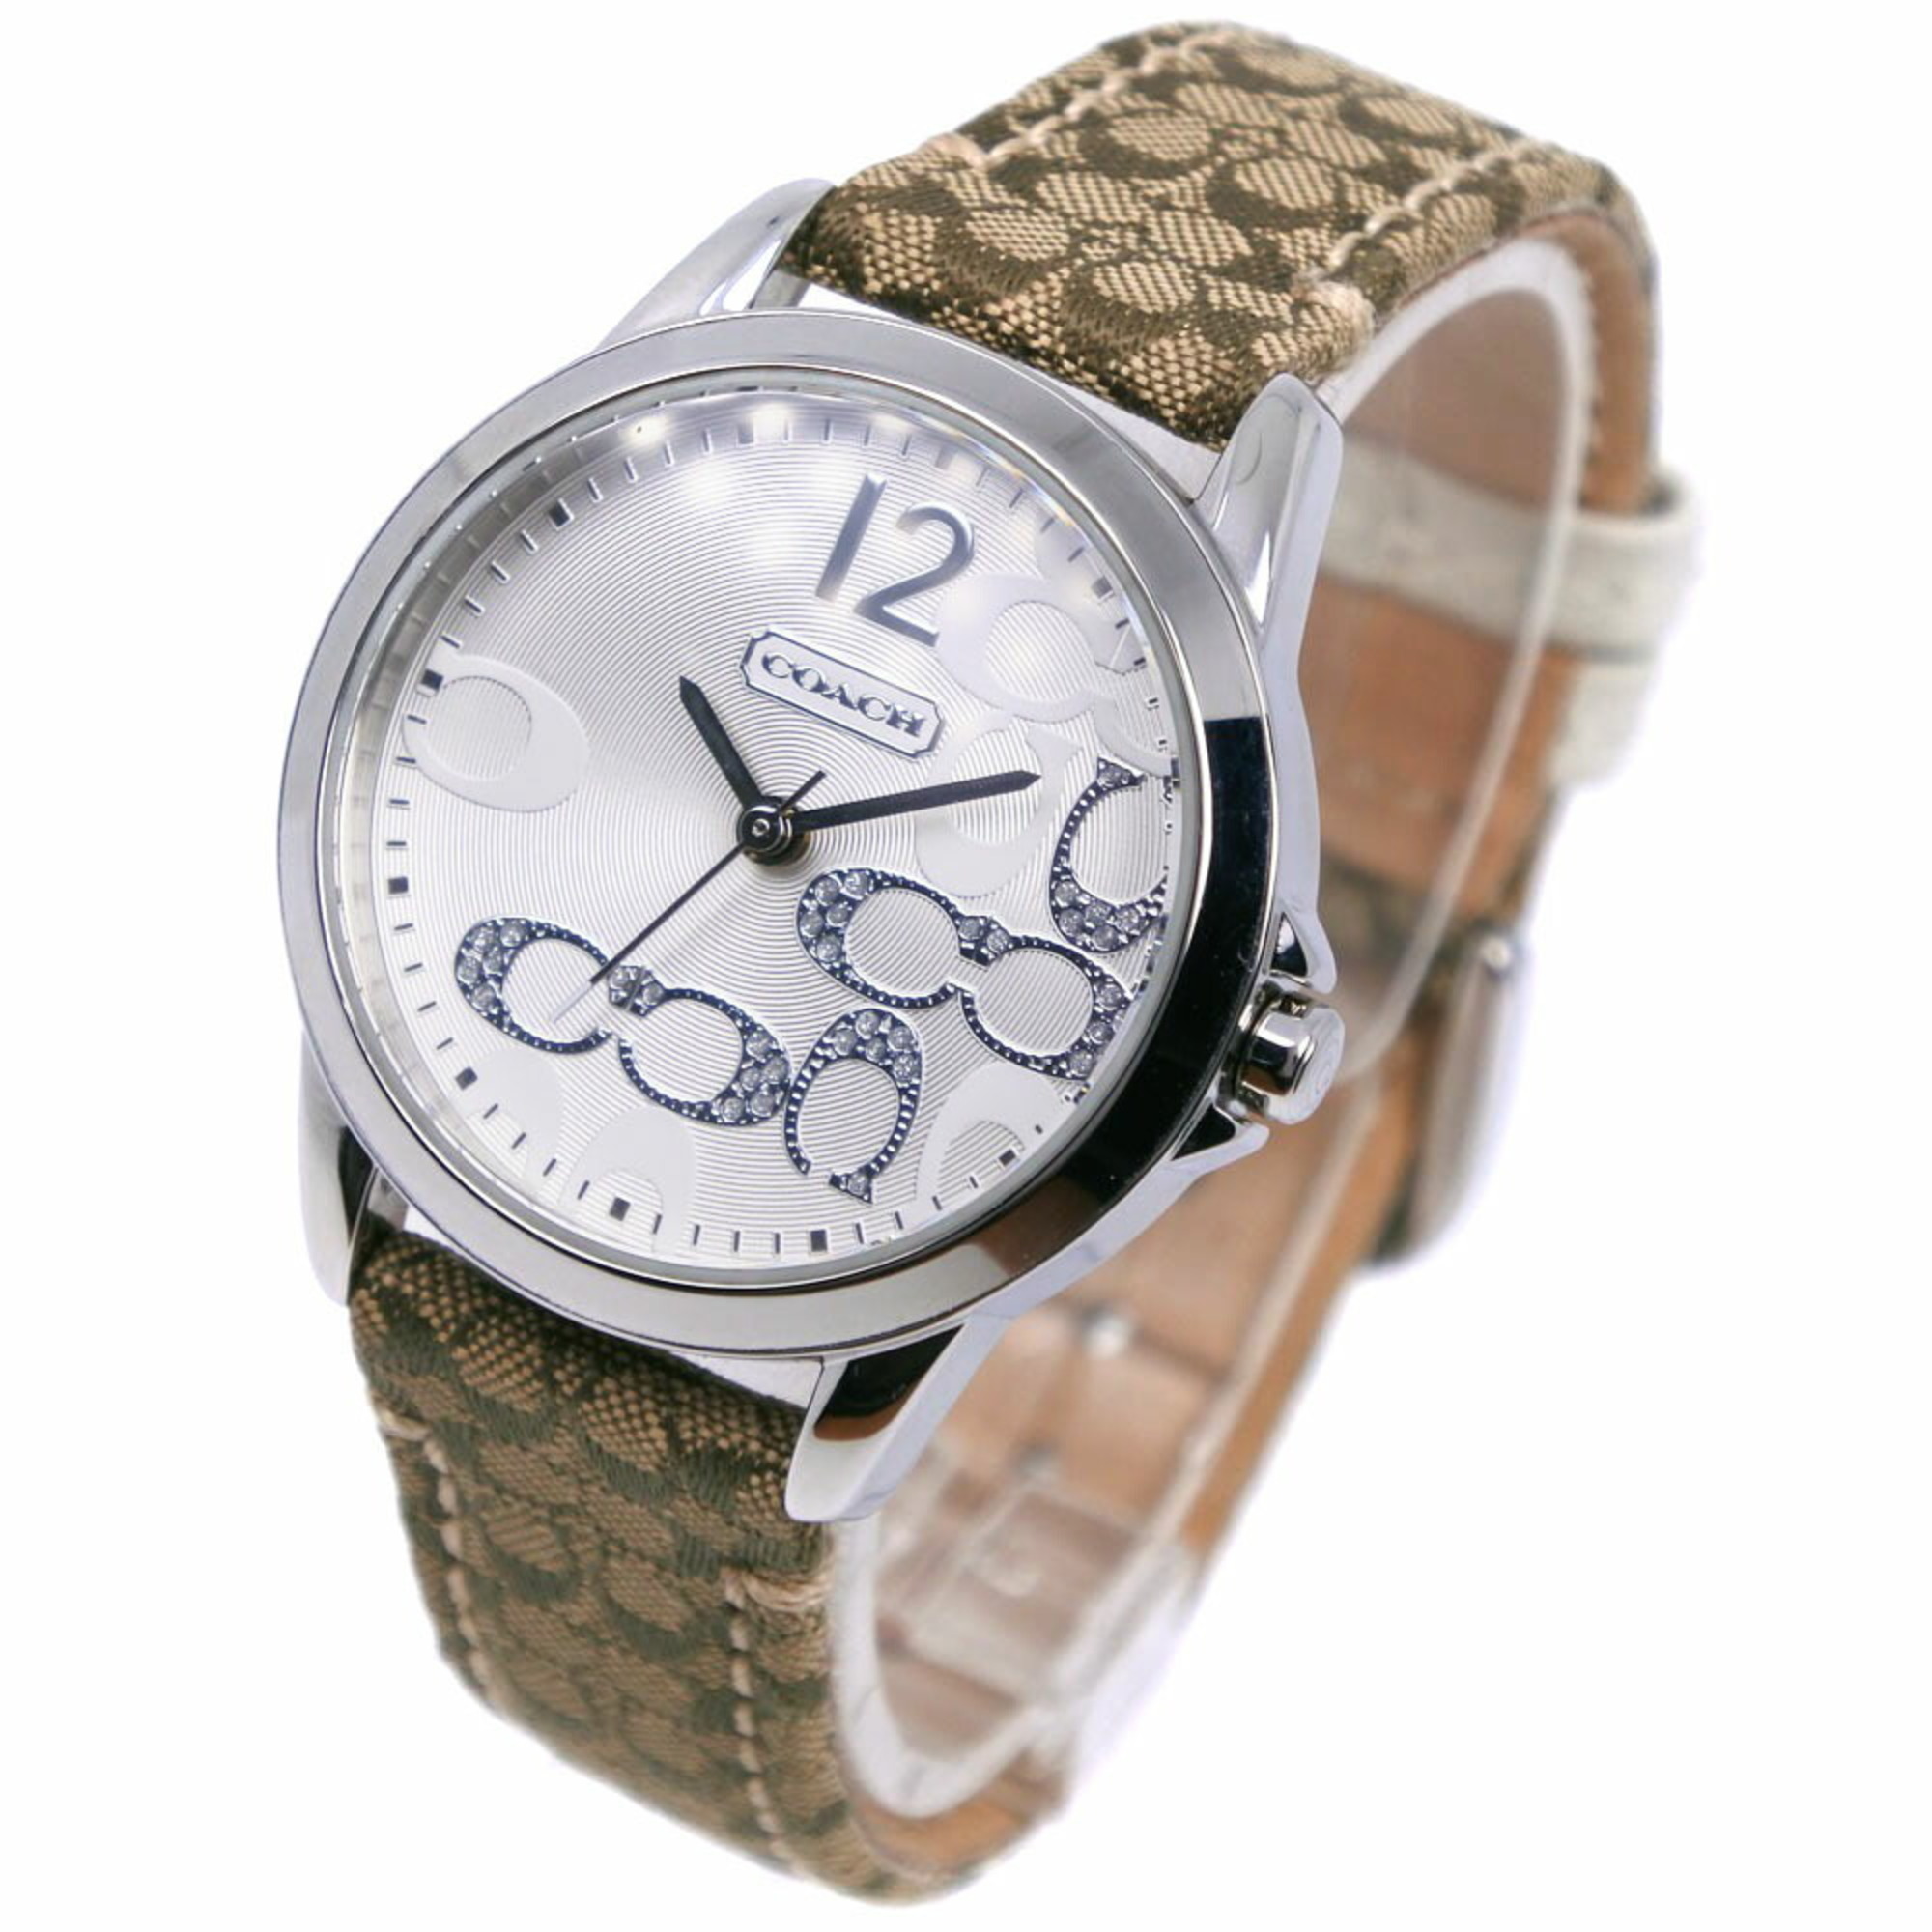 Coach COACH Signature Watch CA13.7.14.0647 Stainless Steel x Canvas Leather Made in China Silver Quartz Analog Display Dial Women's I213023046